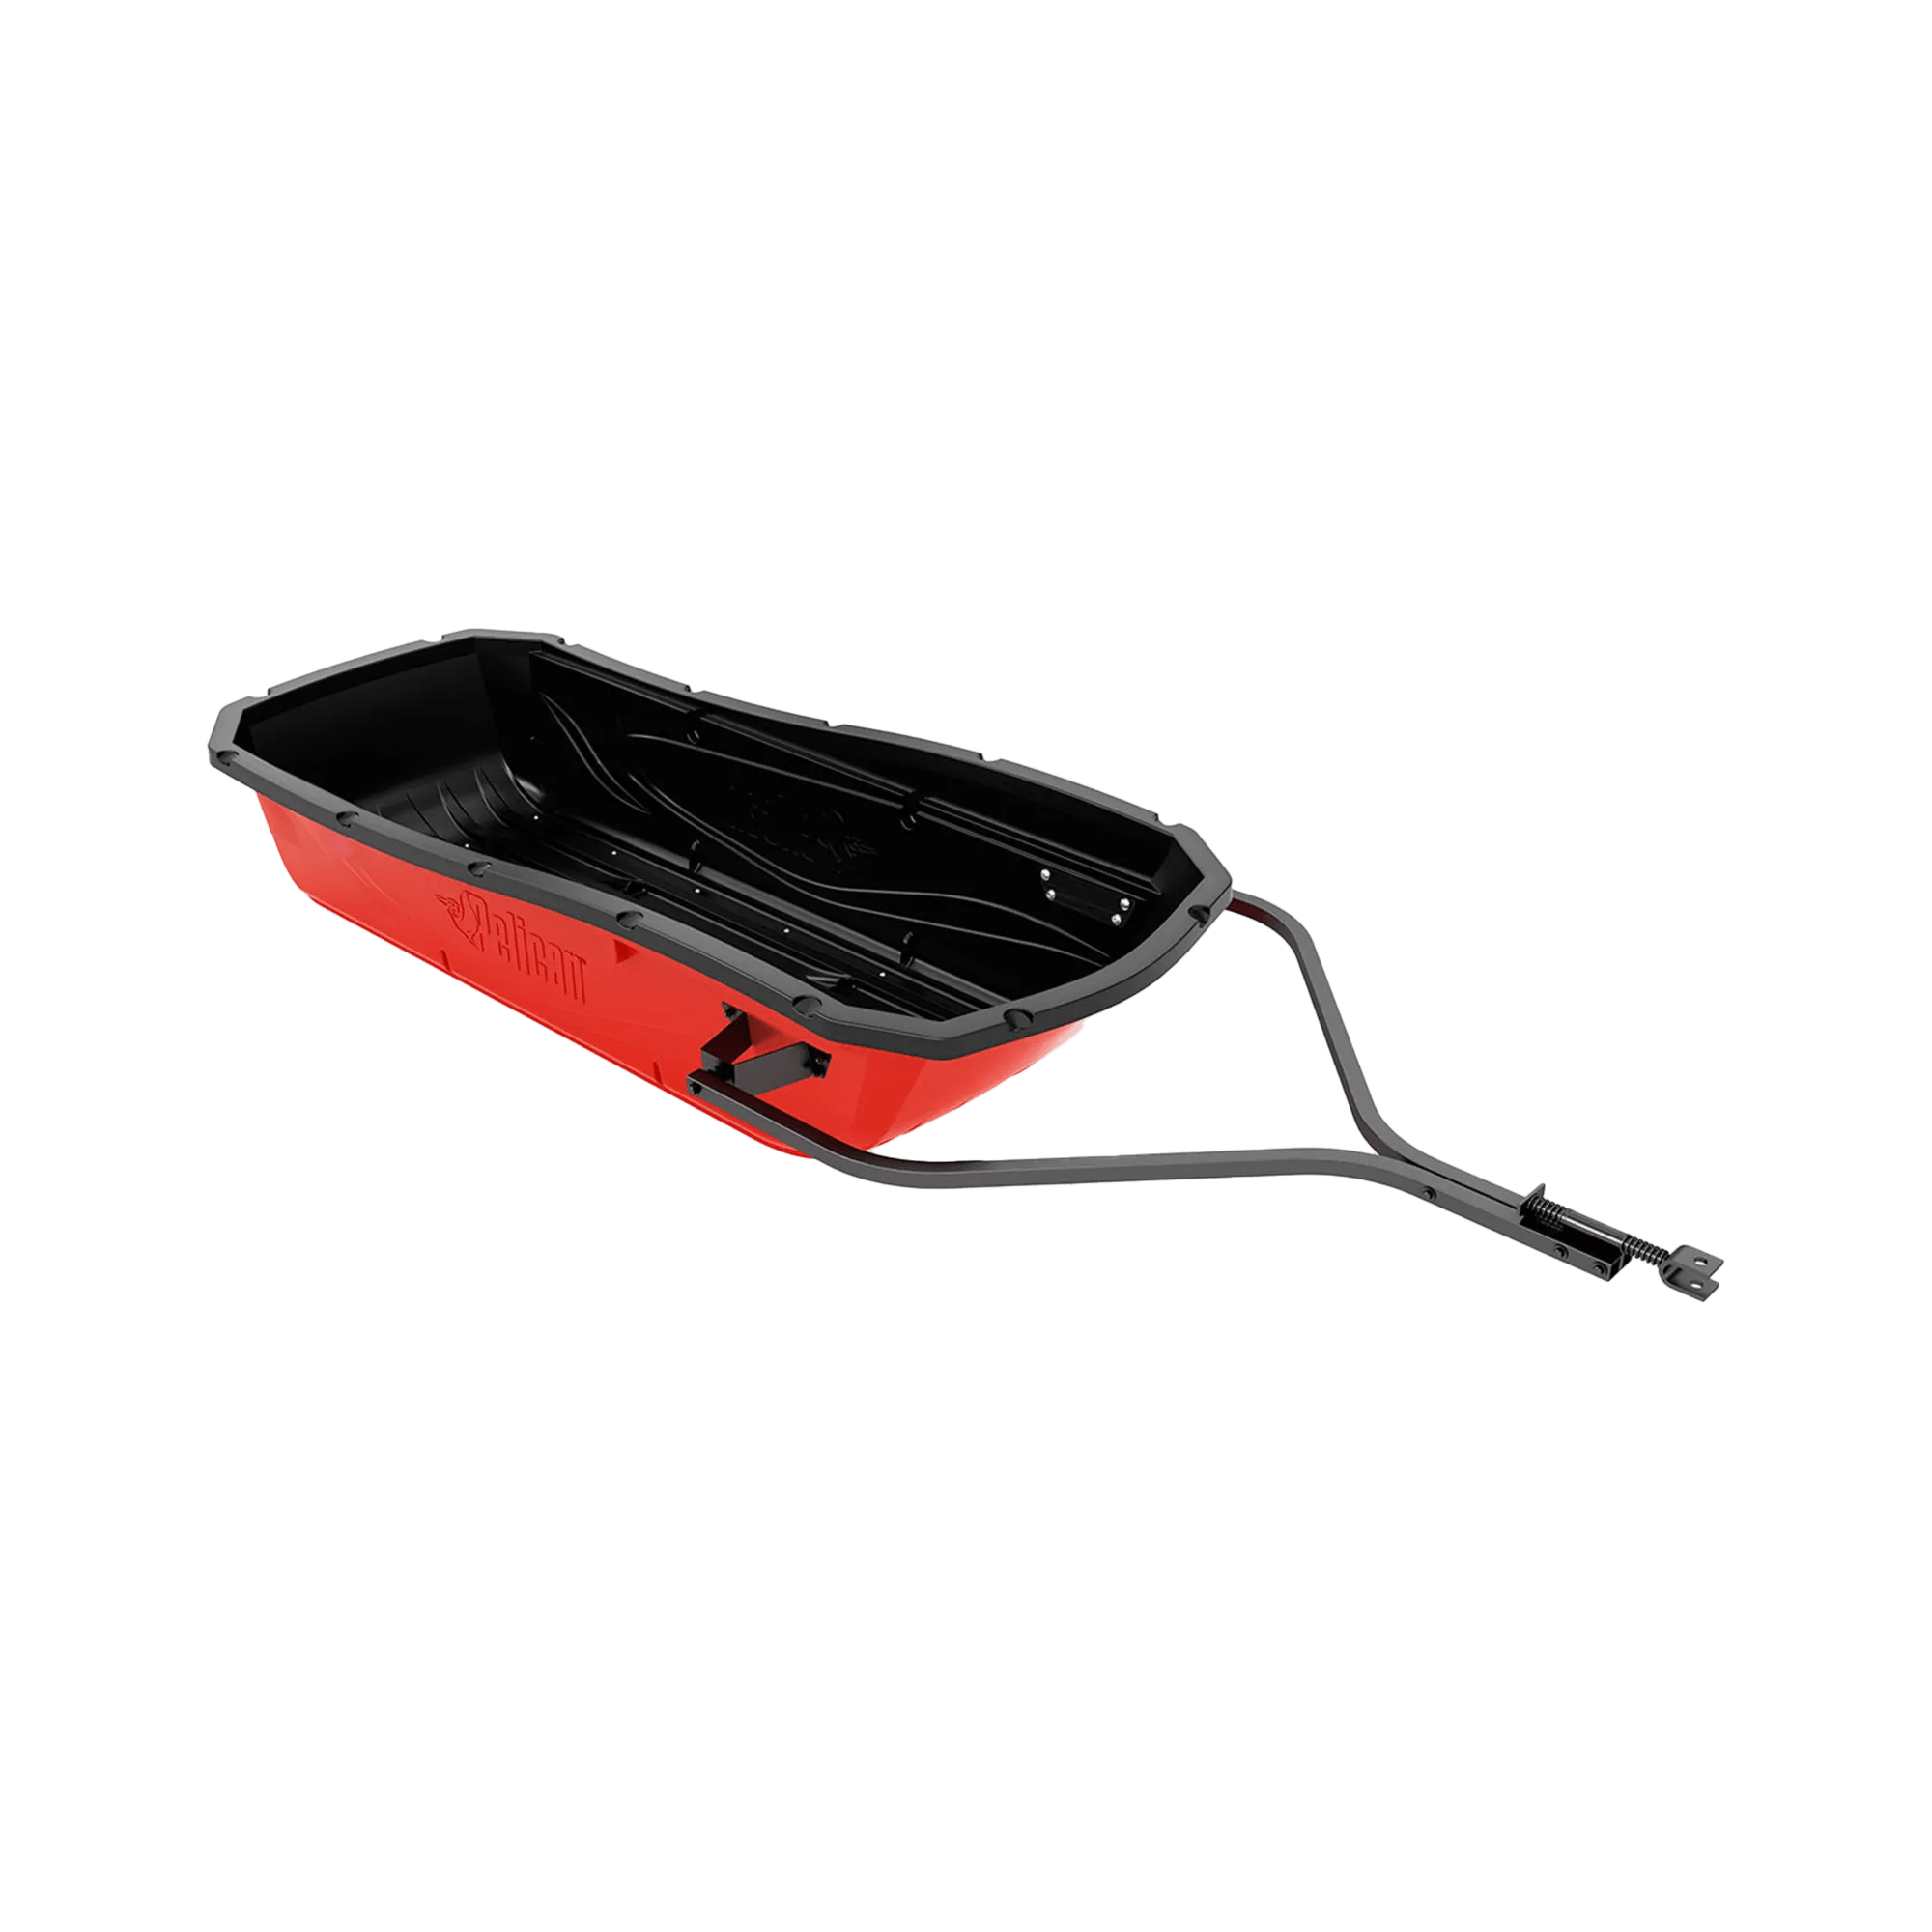 PELICAN - Trek Sport 75 Utility Sled with Runners, Tow Hitch & Travel Cover - Red - LHT75PF01-00 - ISO 